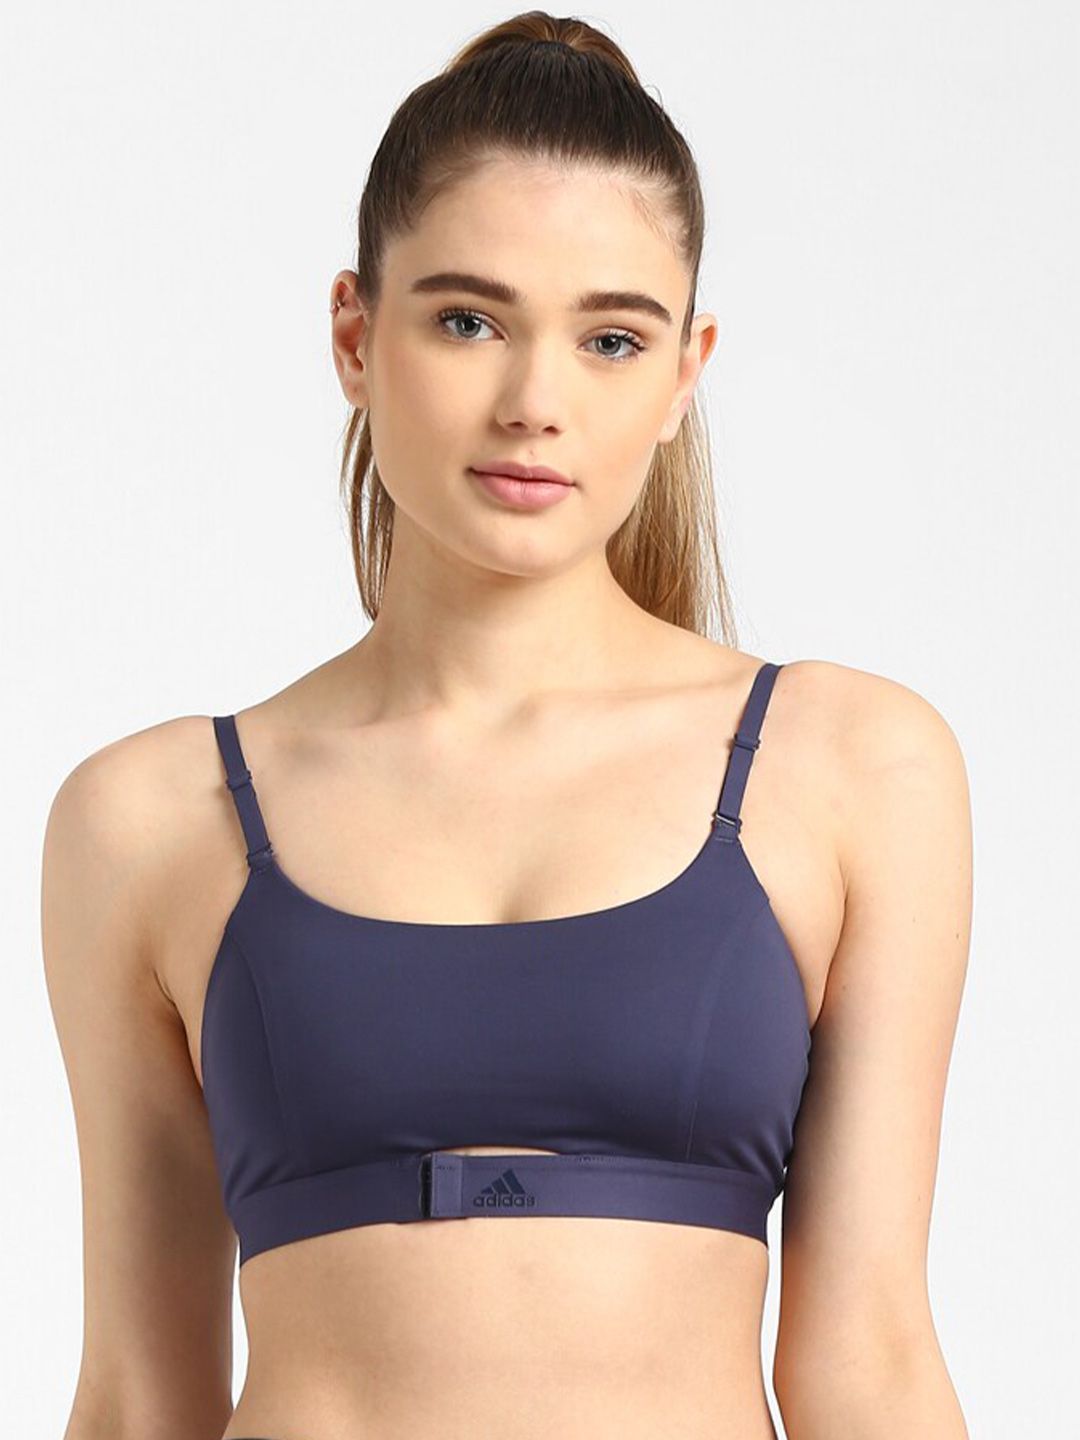 ADIDAS Navy Blue Solid Lightly Padded Training Or Gym Bra Price in India